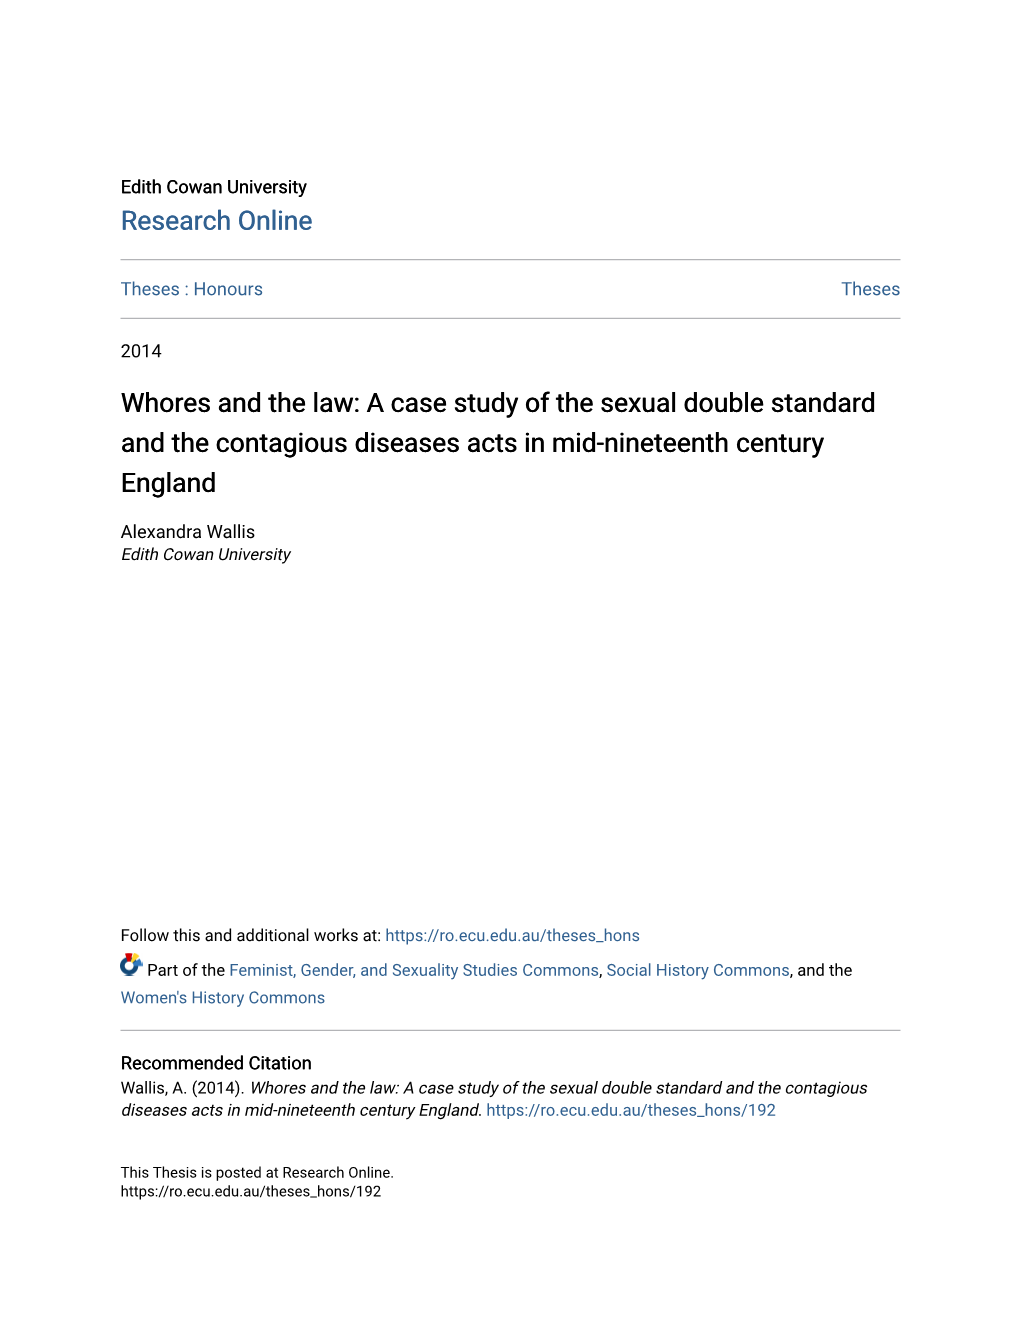 A Case Study of the Sexual Double Standard and the Contagious Diseases Acts in Mid-Nineteenth Century England